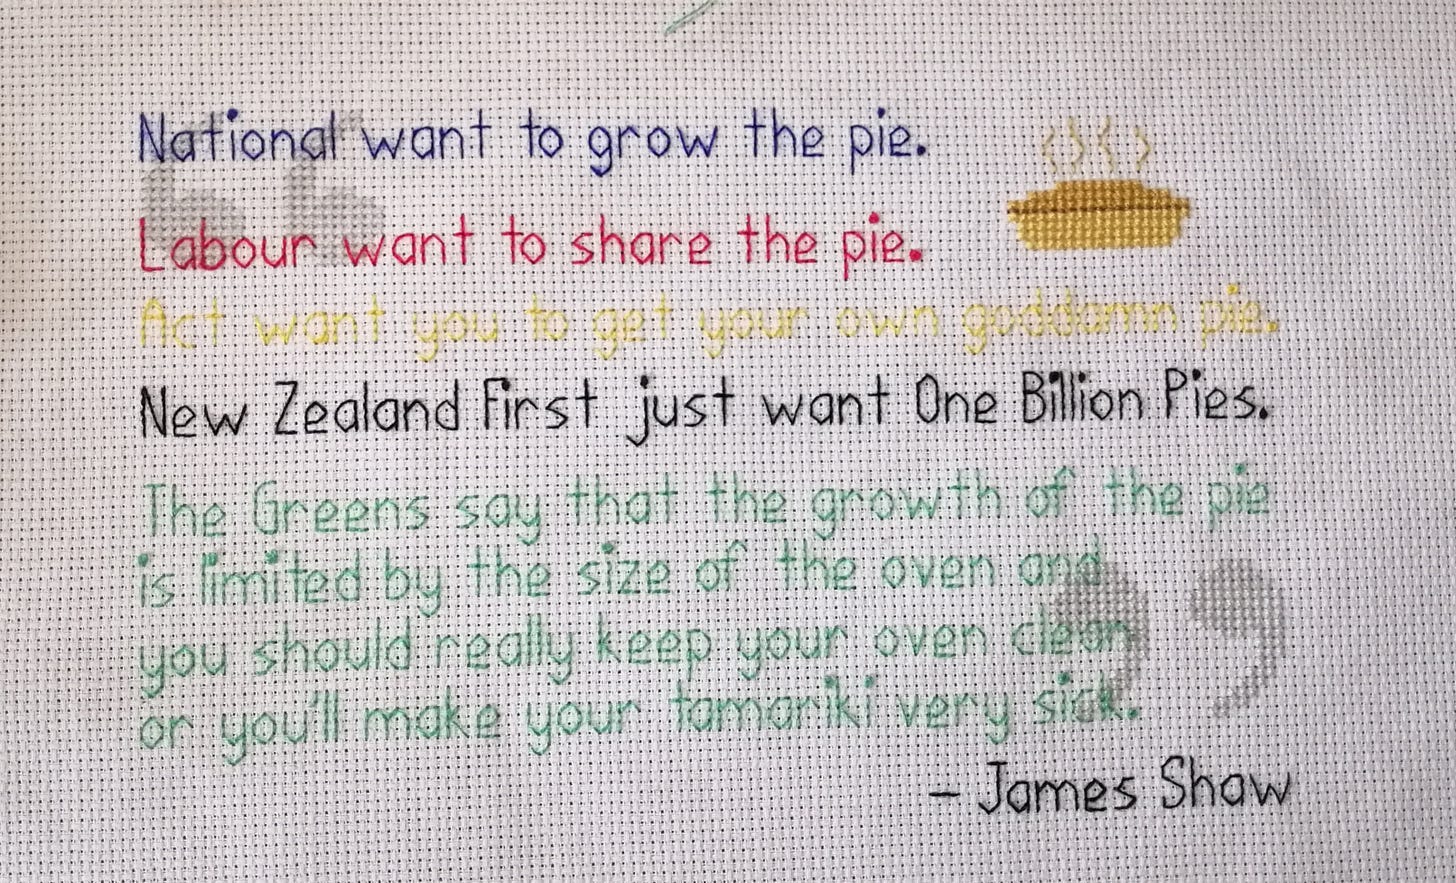 Backstich quote about pies and all the political parties in NZ, by James Shaw